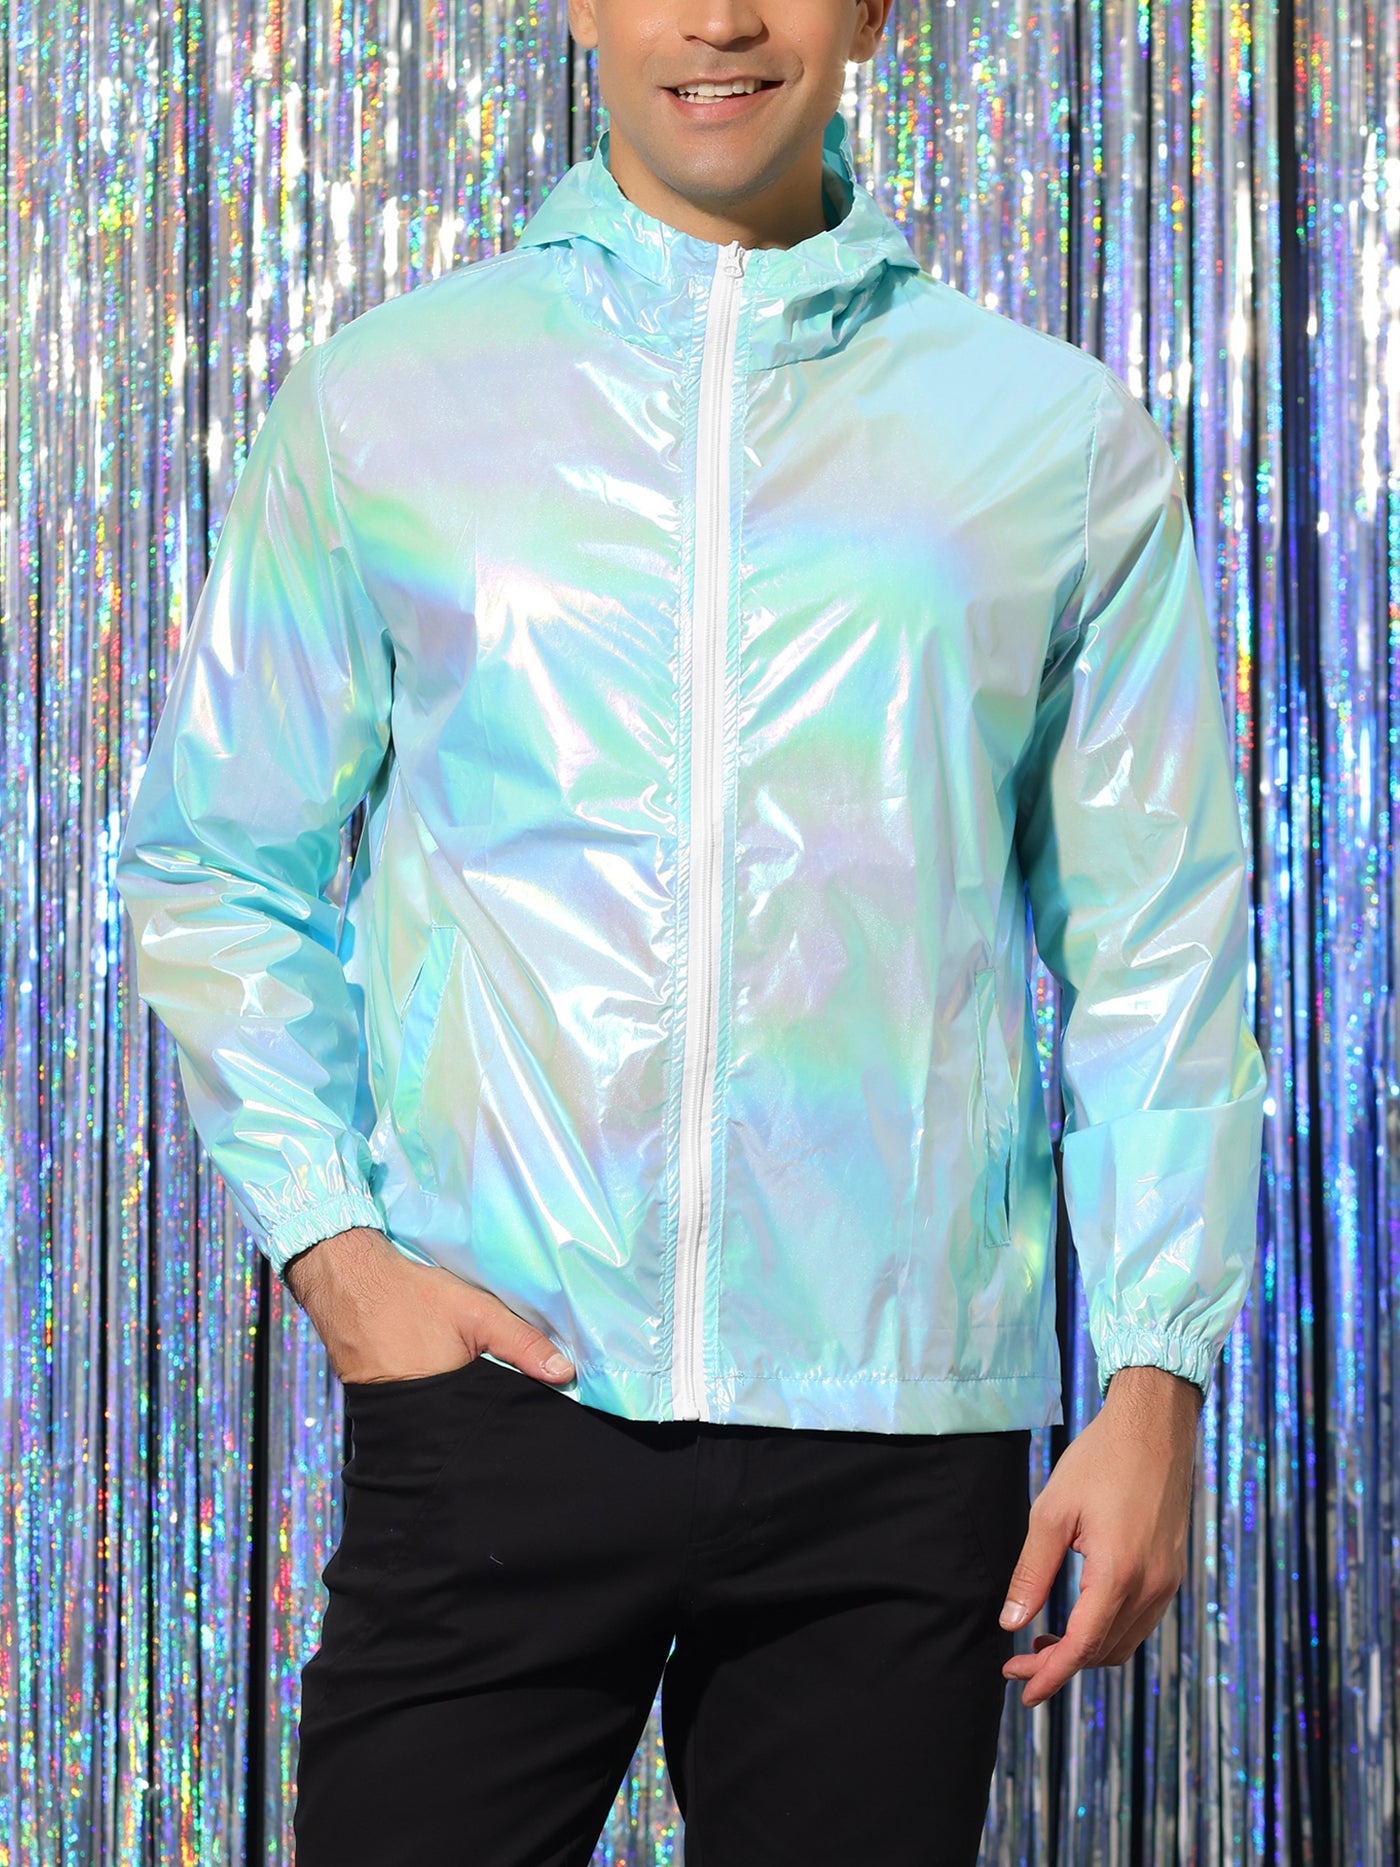 Holographic Glossy Parka Jacket Autumn Winter Warm Hooded Zip Up